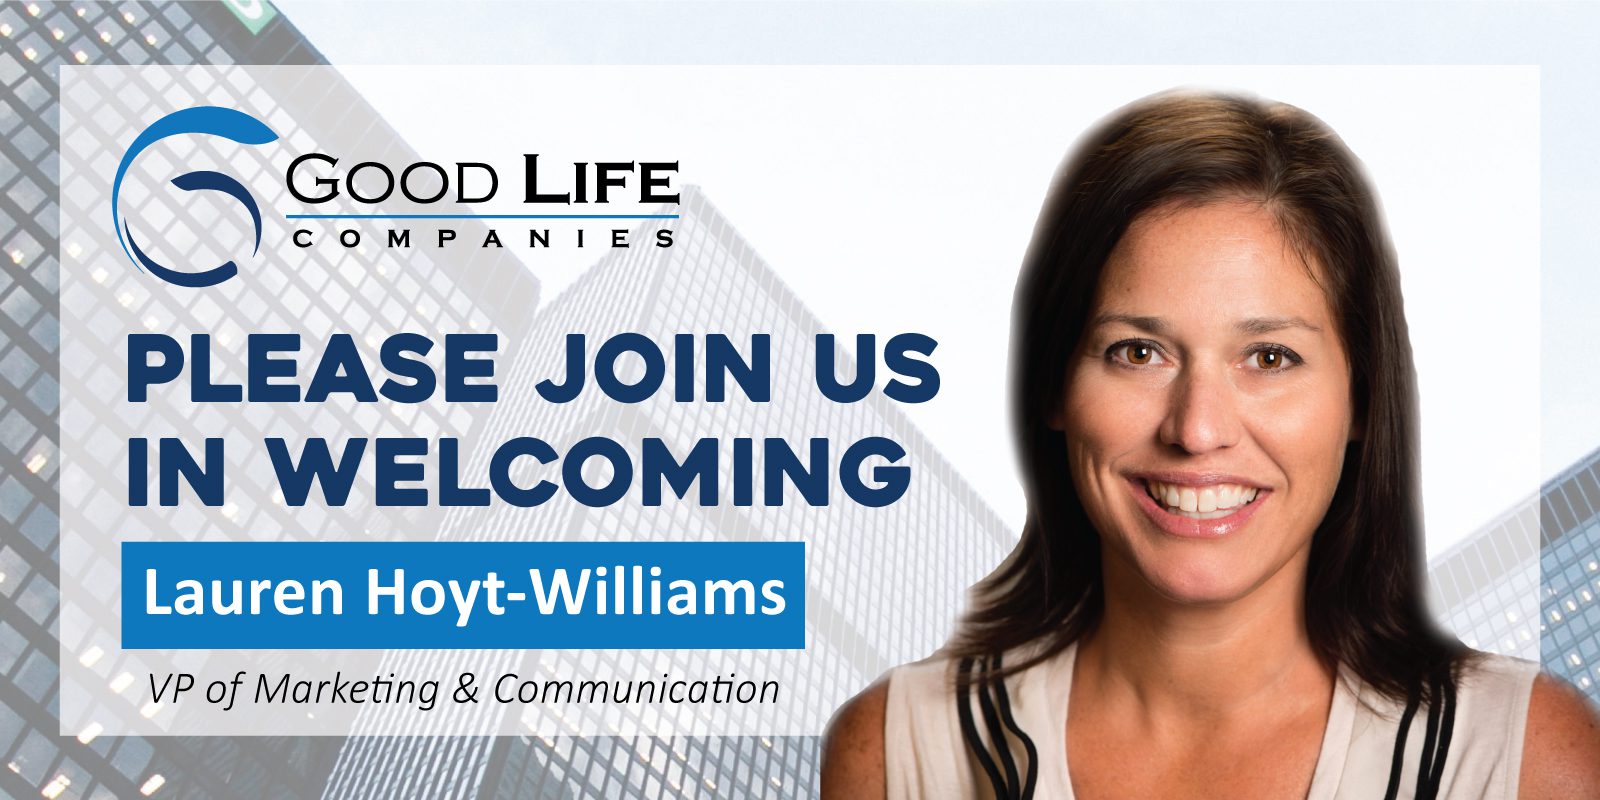 Good Life Companies Welcomes Lauren Hoyt-Williams as VP, Marketing and Communication